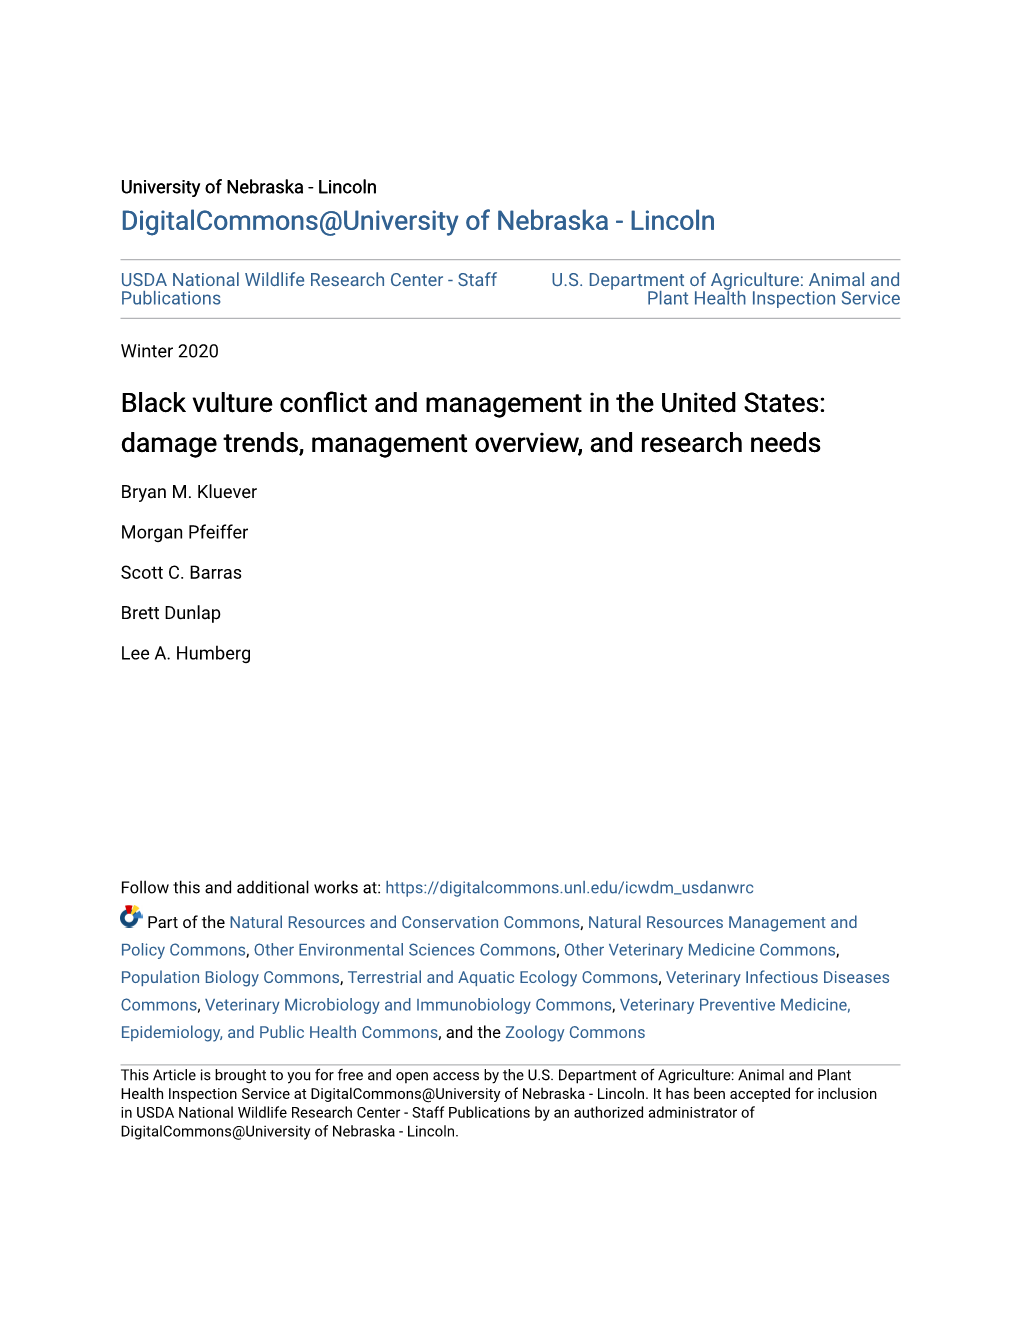 Black Vulture Conflict and Management in the United States: Damage Trends, Management Overview, and Research Needs